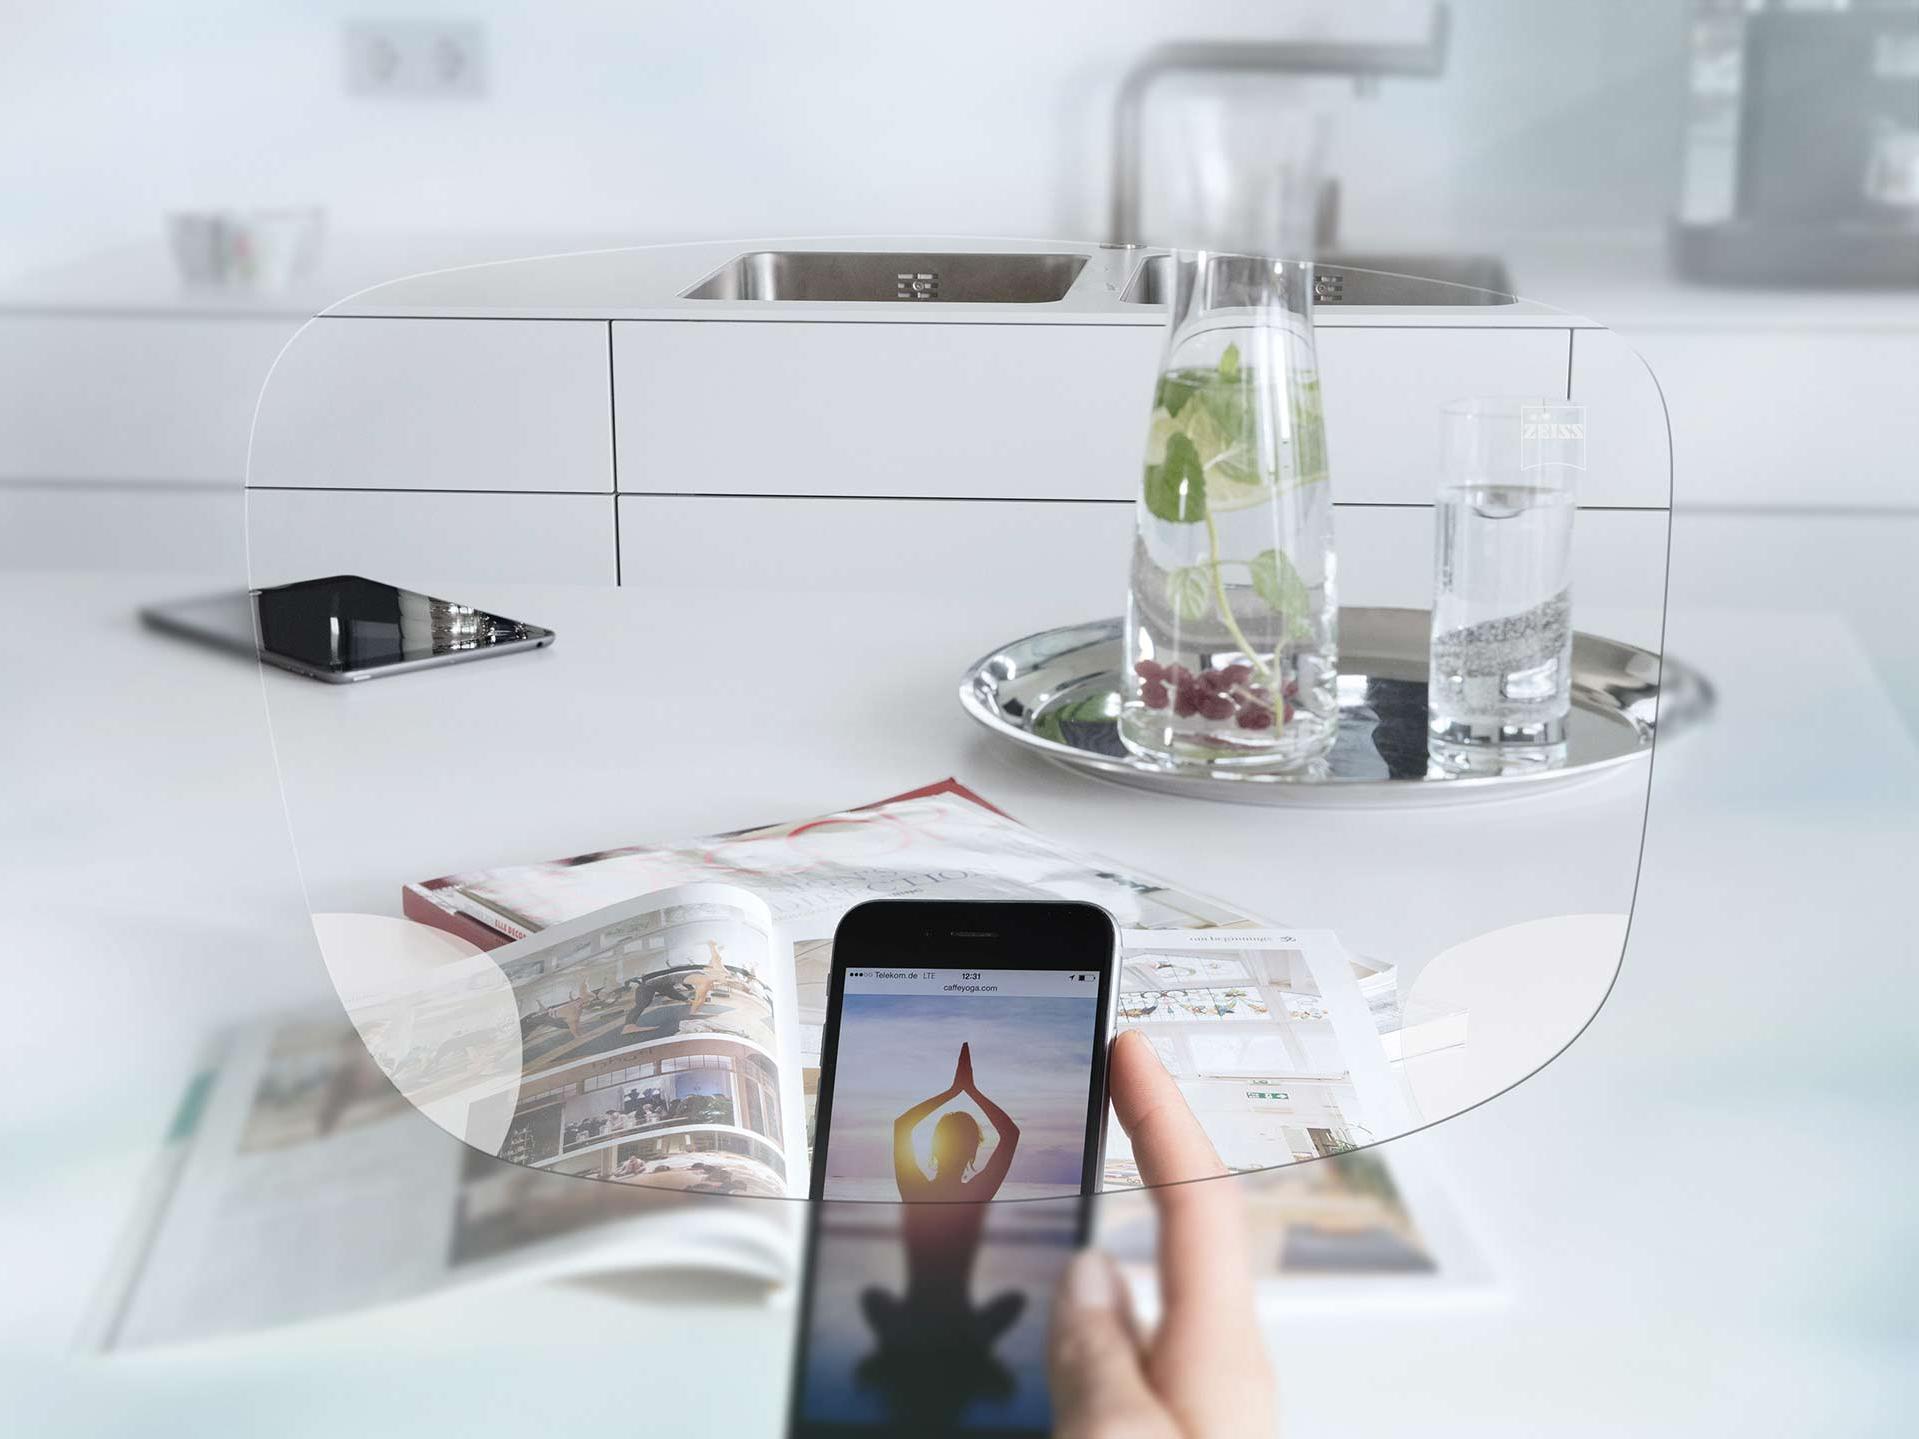 View through ZEISS EnergizeMe Single Vision Spectacle Lens at smartphone screen and organised kitchen table